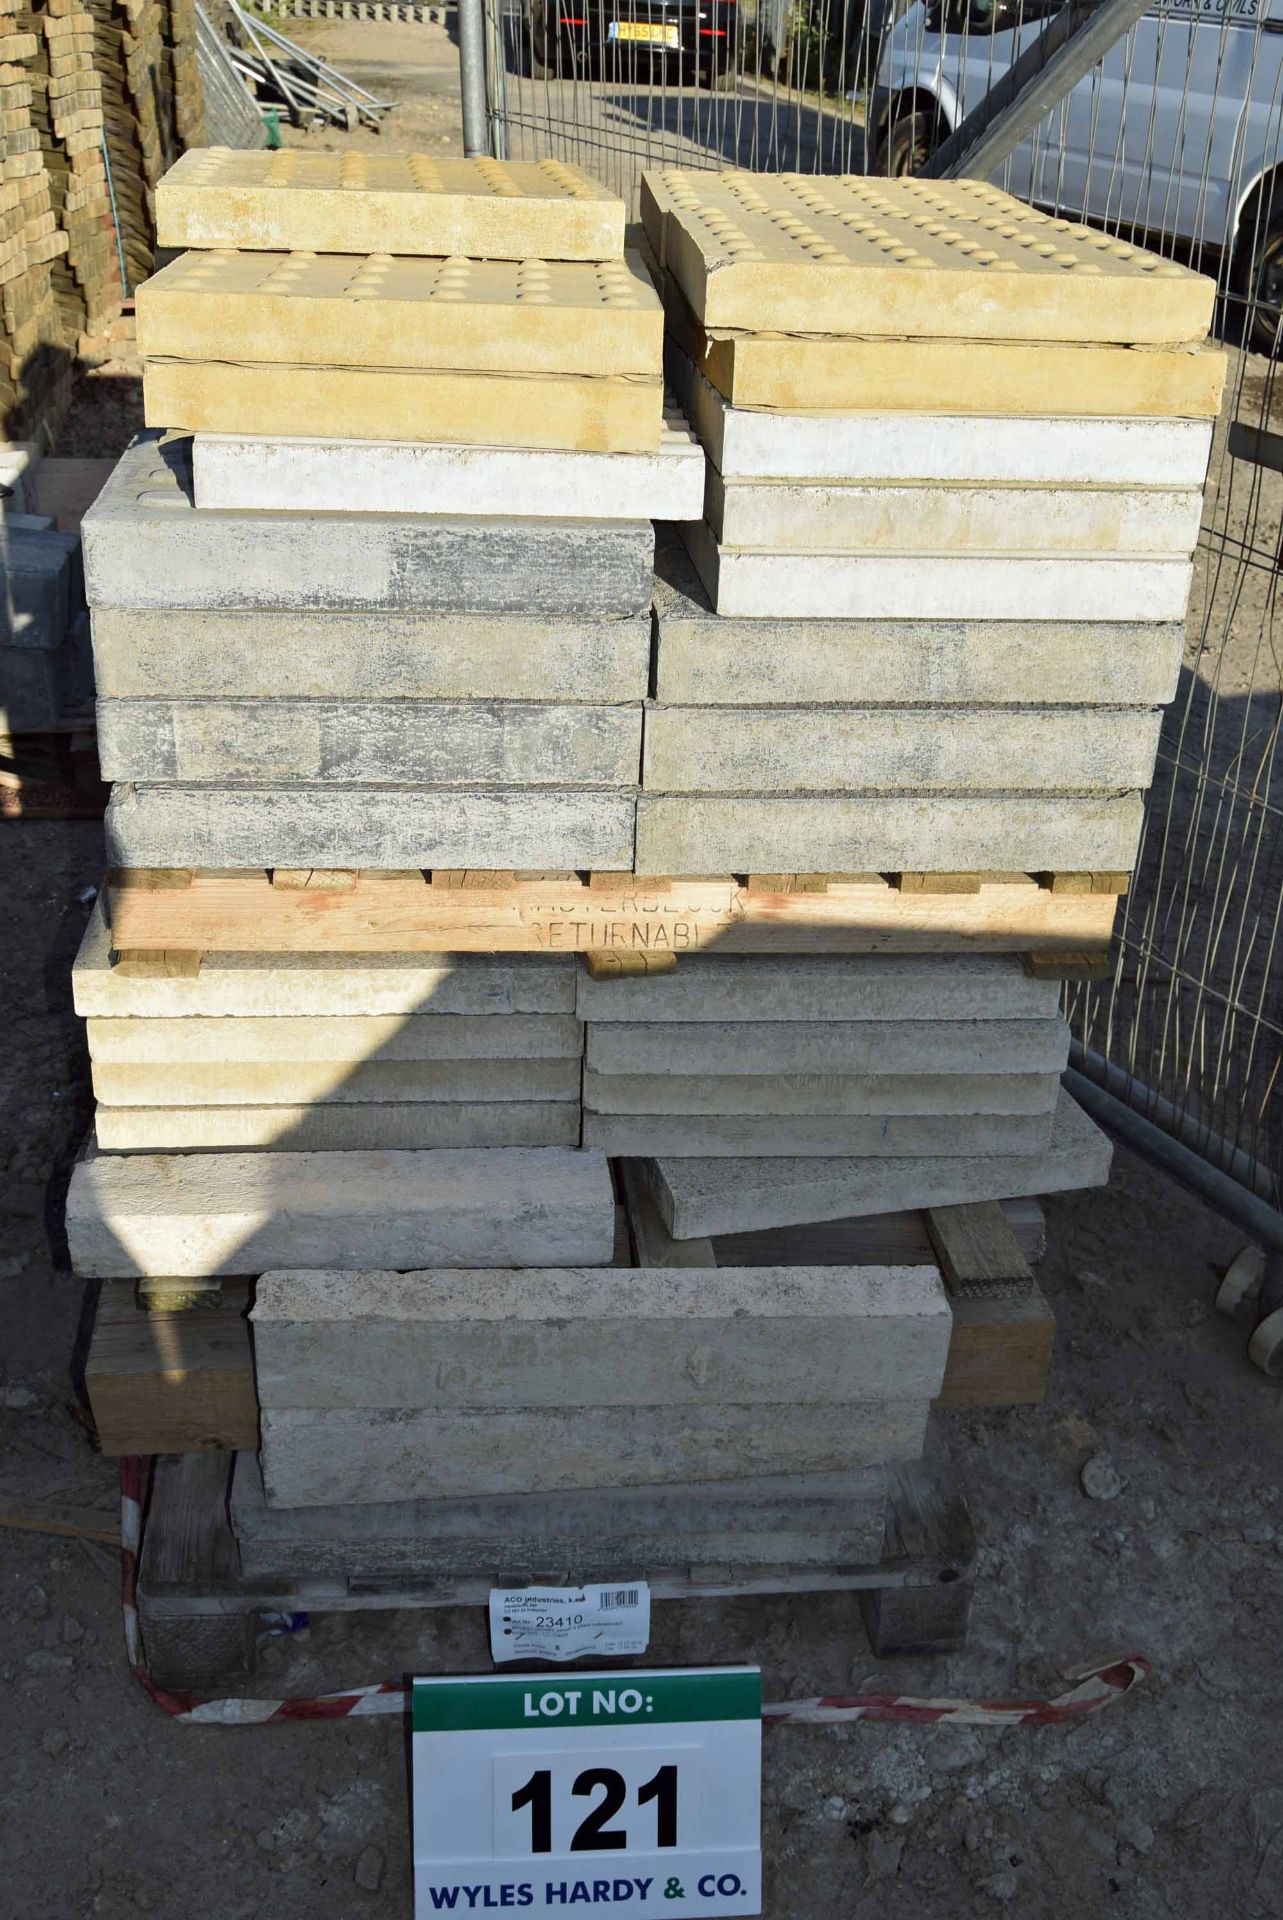 A Quantity of Various Paving Slabs comprising Four 600mm x 600mm Dimpled, Twenty 445mm x 445mm Stone